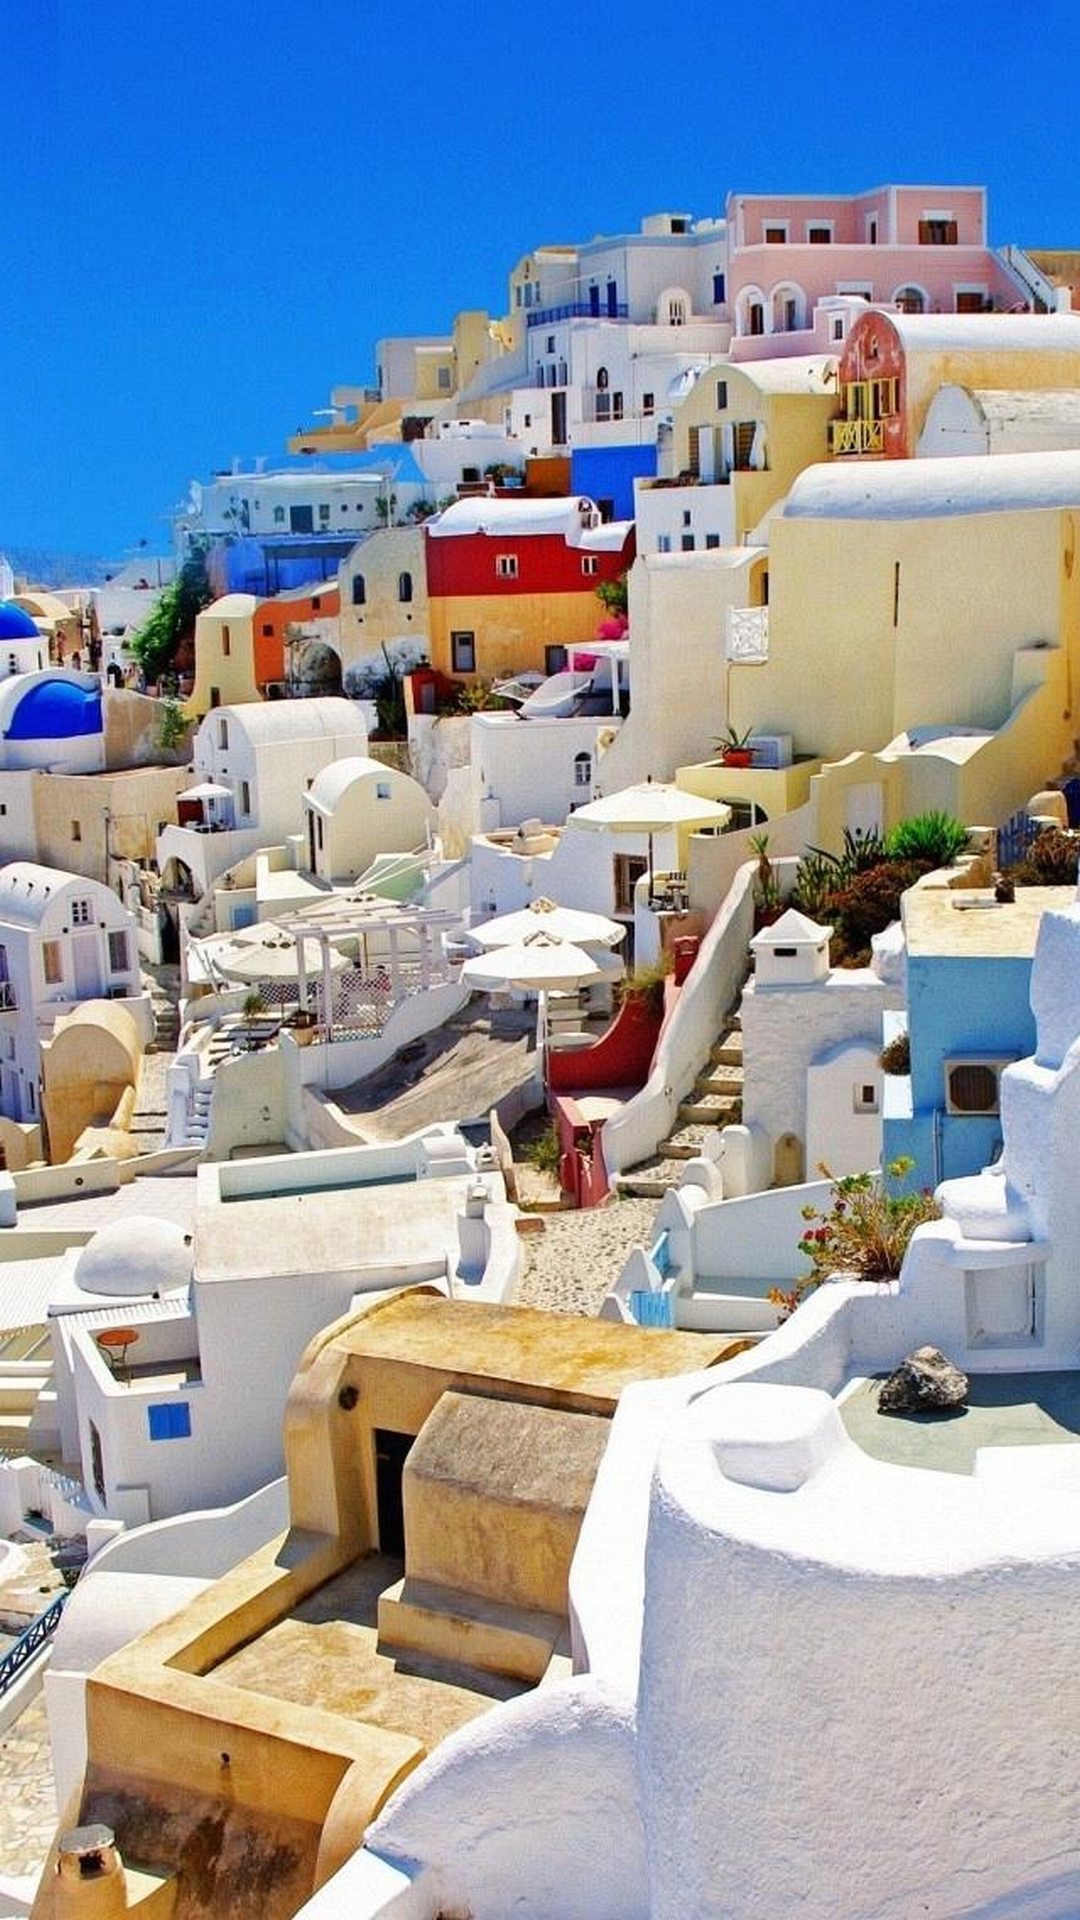 Santorini Greece 4K wallpapers free and easy to download